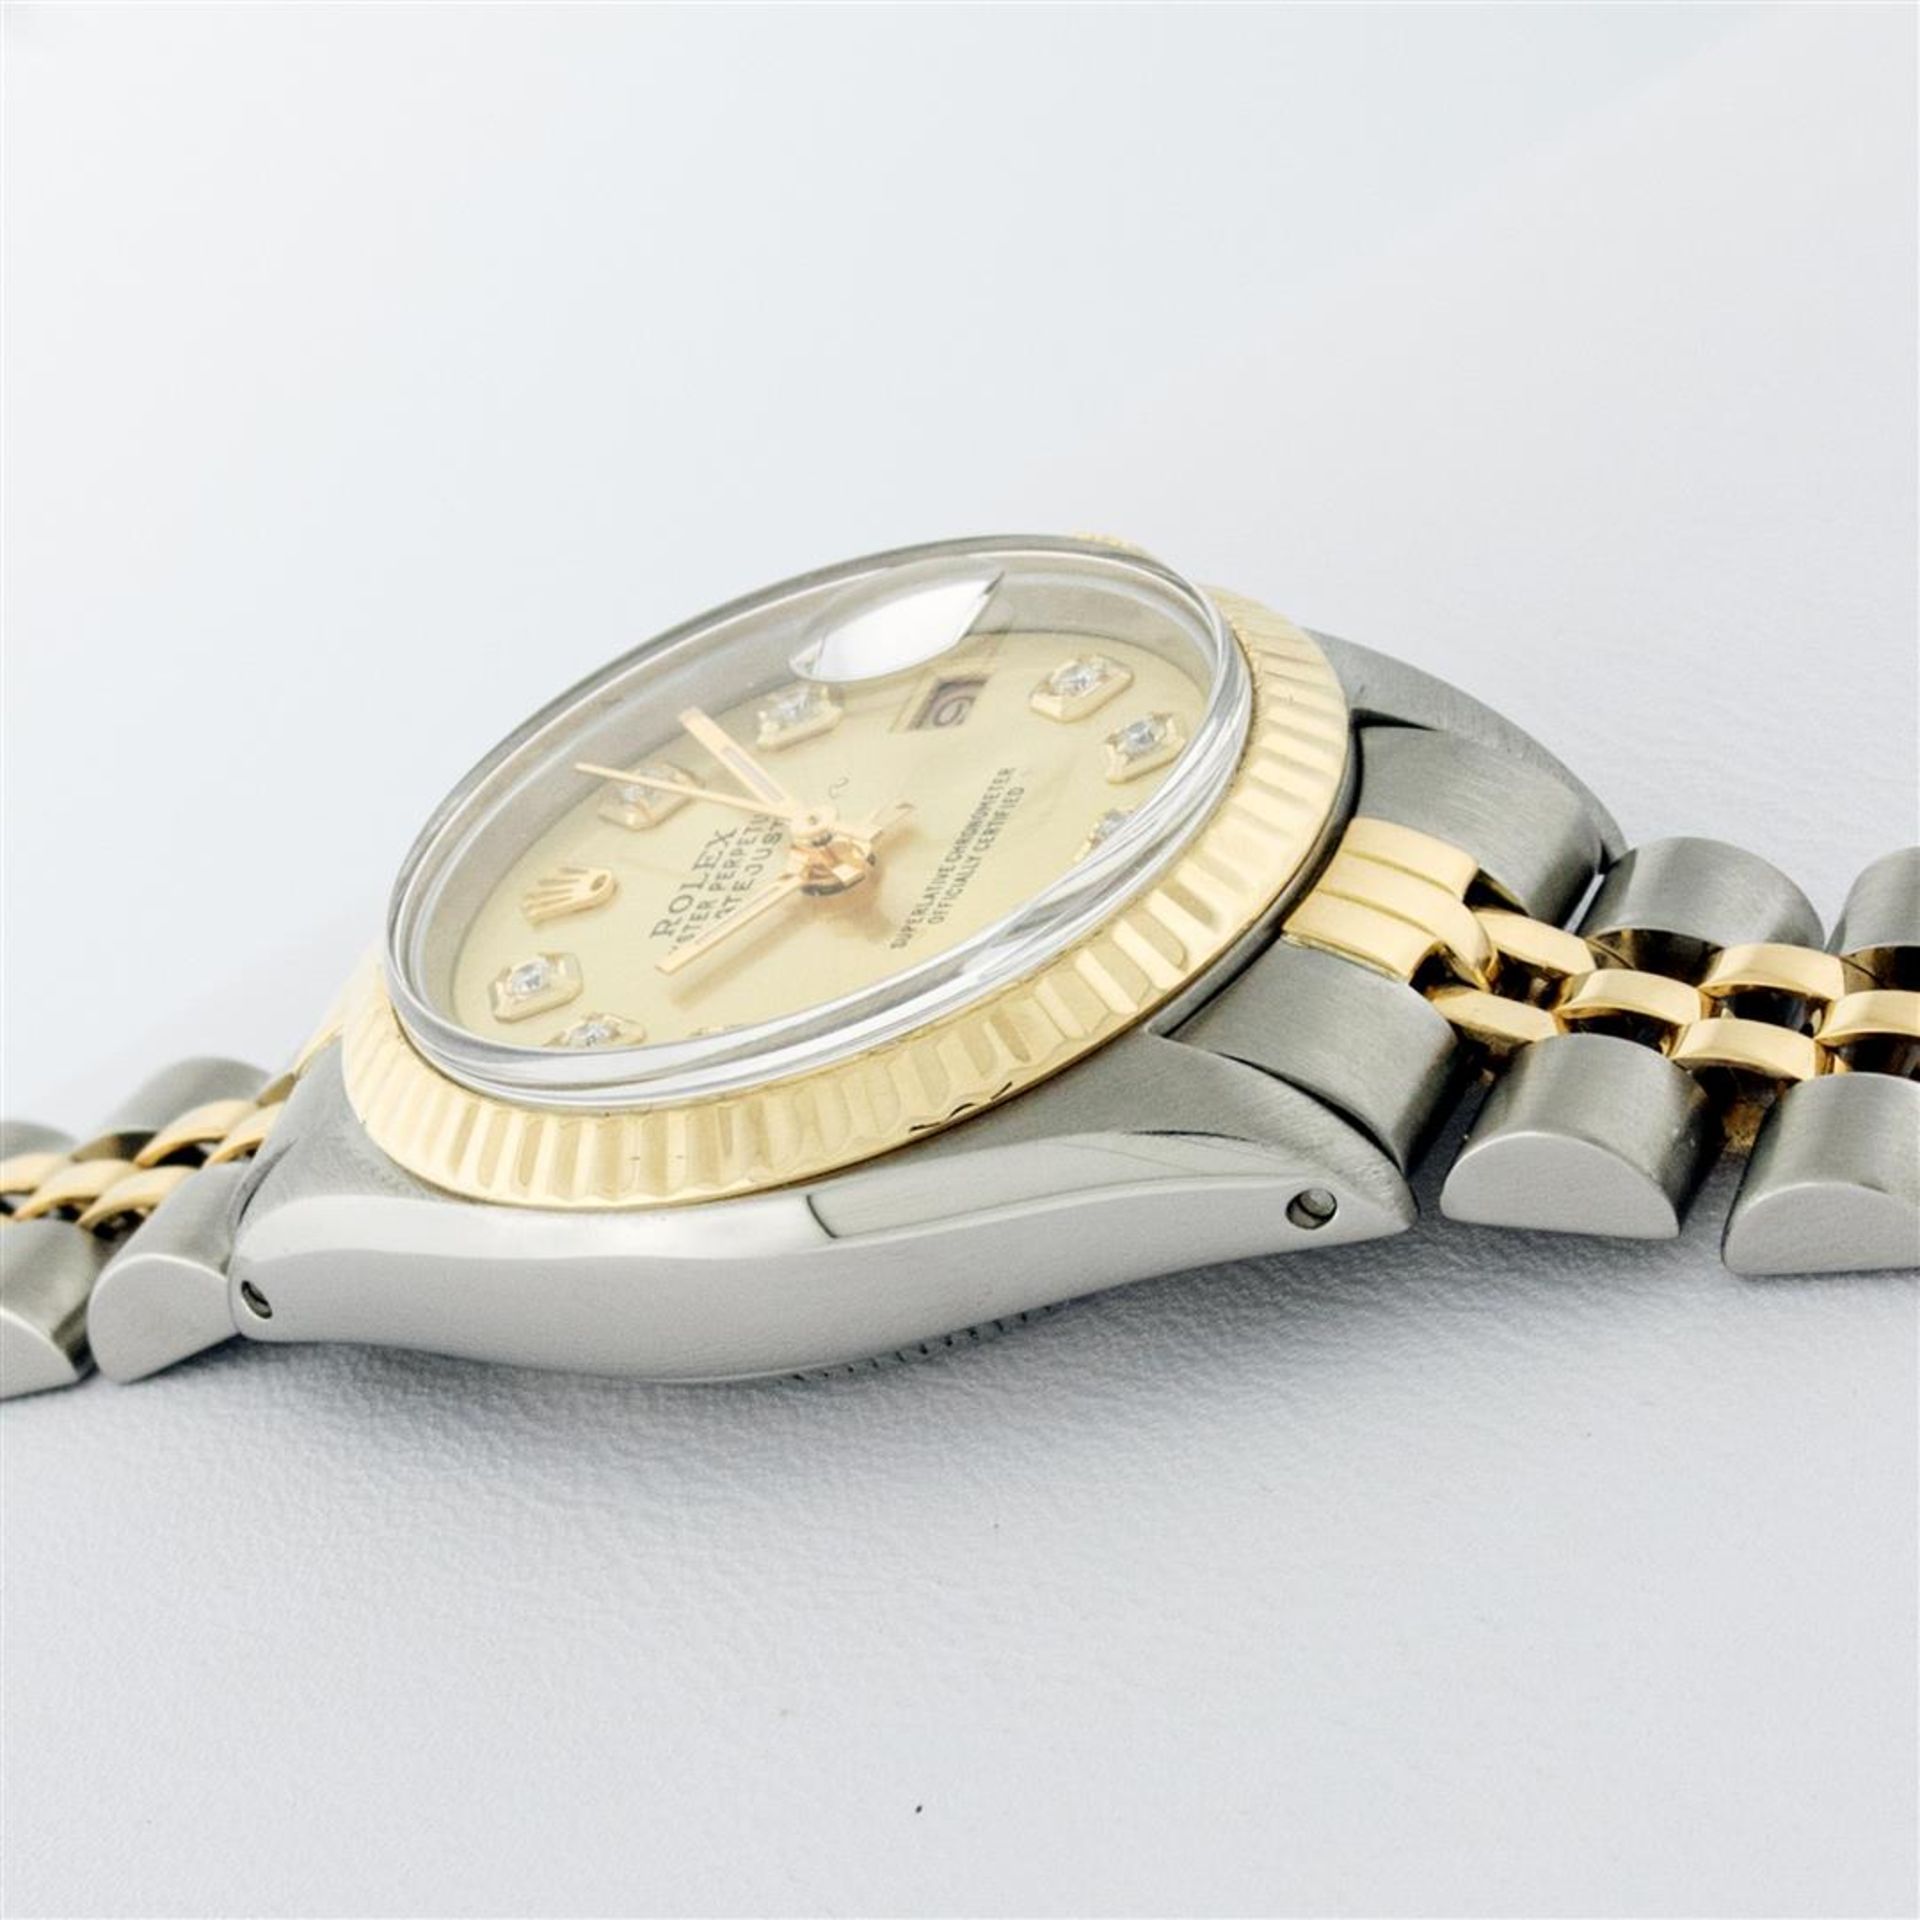 Rolex Ladies 2 Tone Champagne Diamond 26MM Oyster Perpetual Datejust Wristwatch - Image 5 of 9